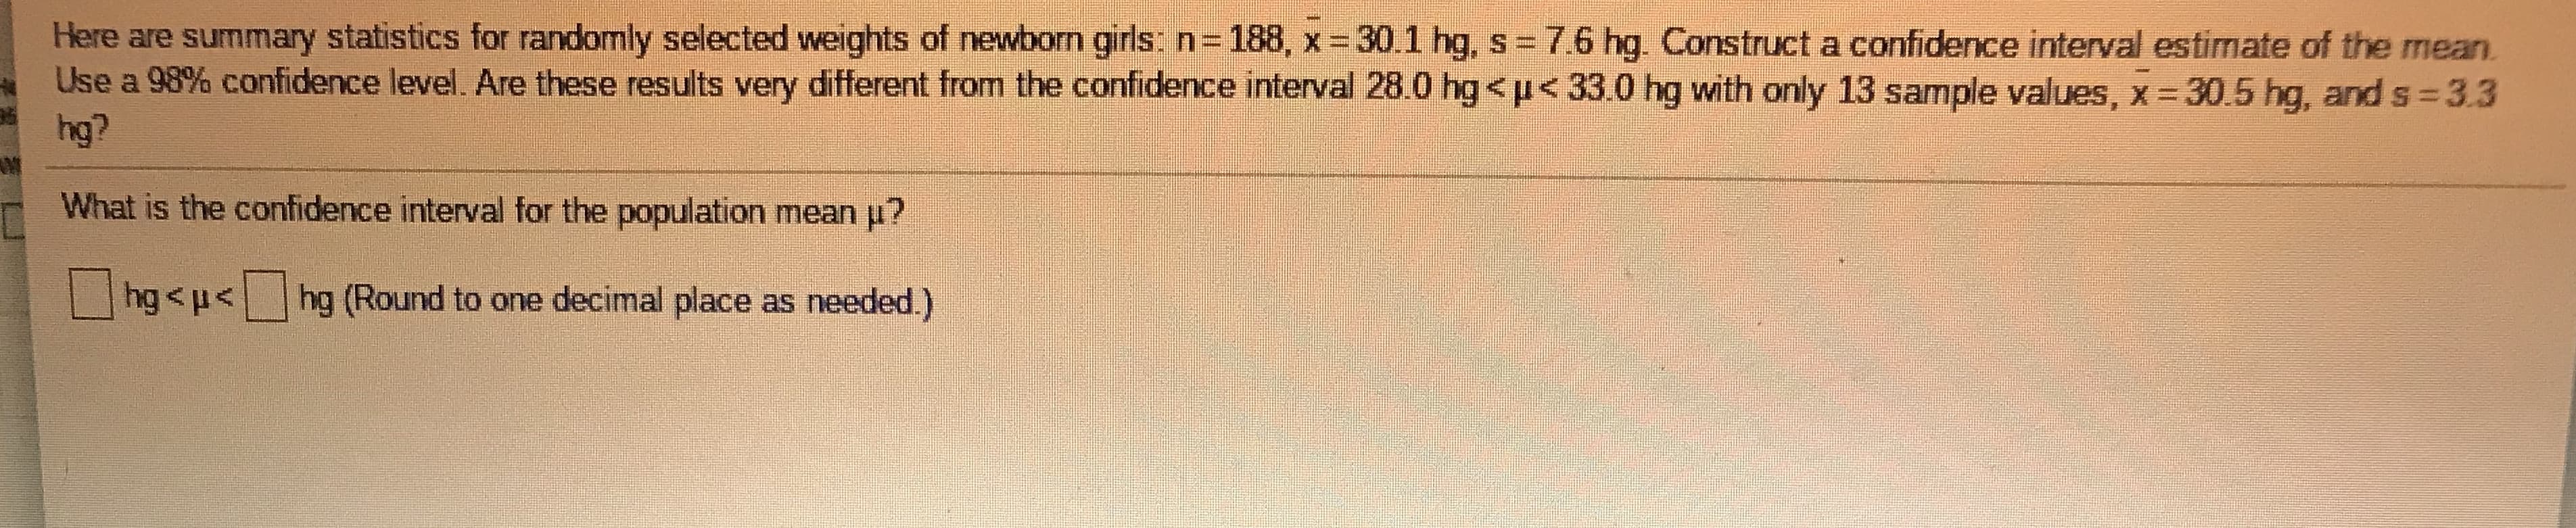 Here are summary statistics for randomly selected weights of newborn girls: n 188, x 30.1 hg, s = 7.6 hg. Construct a confidence interval estimate of the mean.
Use a 98% confidence level. Are these results very different from the confidence interval 28.0 hg<u< 33.0 hg with only 13 sample values, x 30.5 hg, and s = 3.3
hg?
